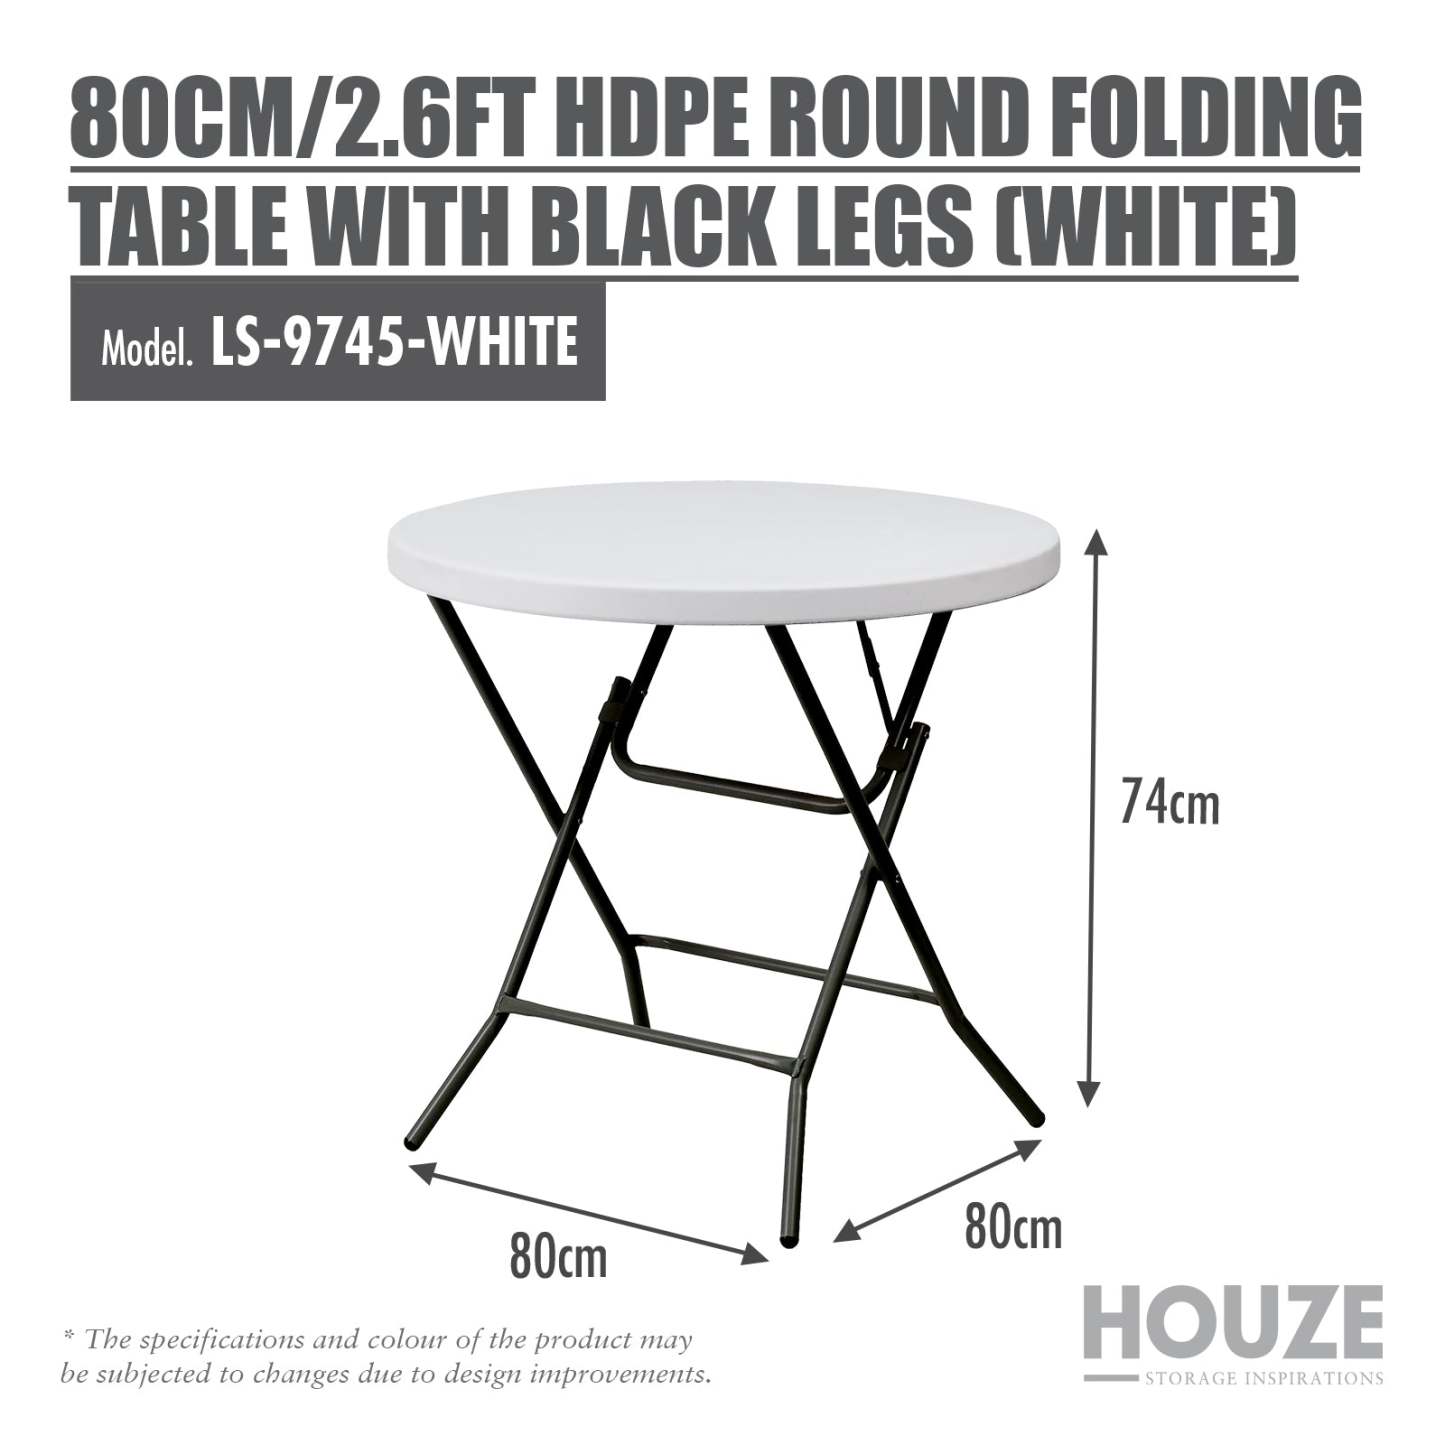 80cm HDPE Round Folding Table with Black Legs (White)